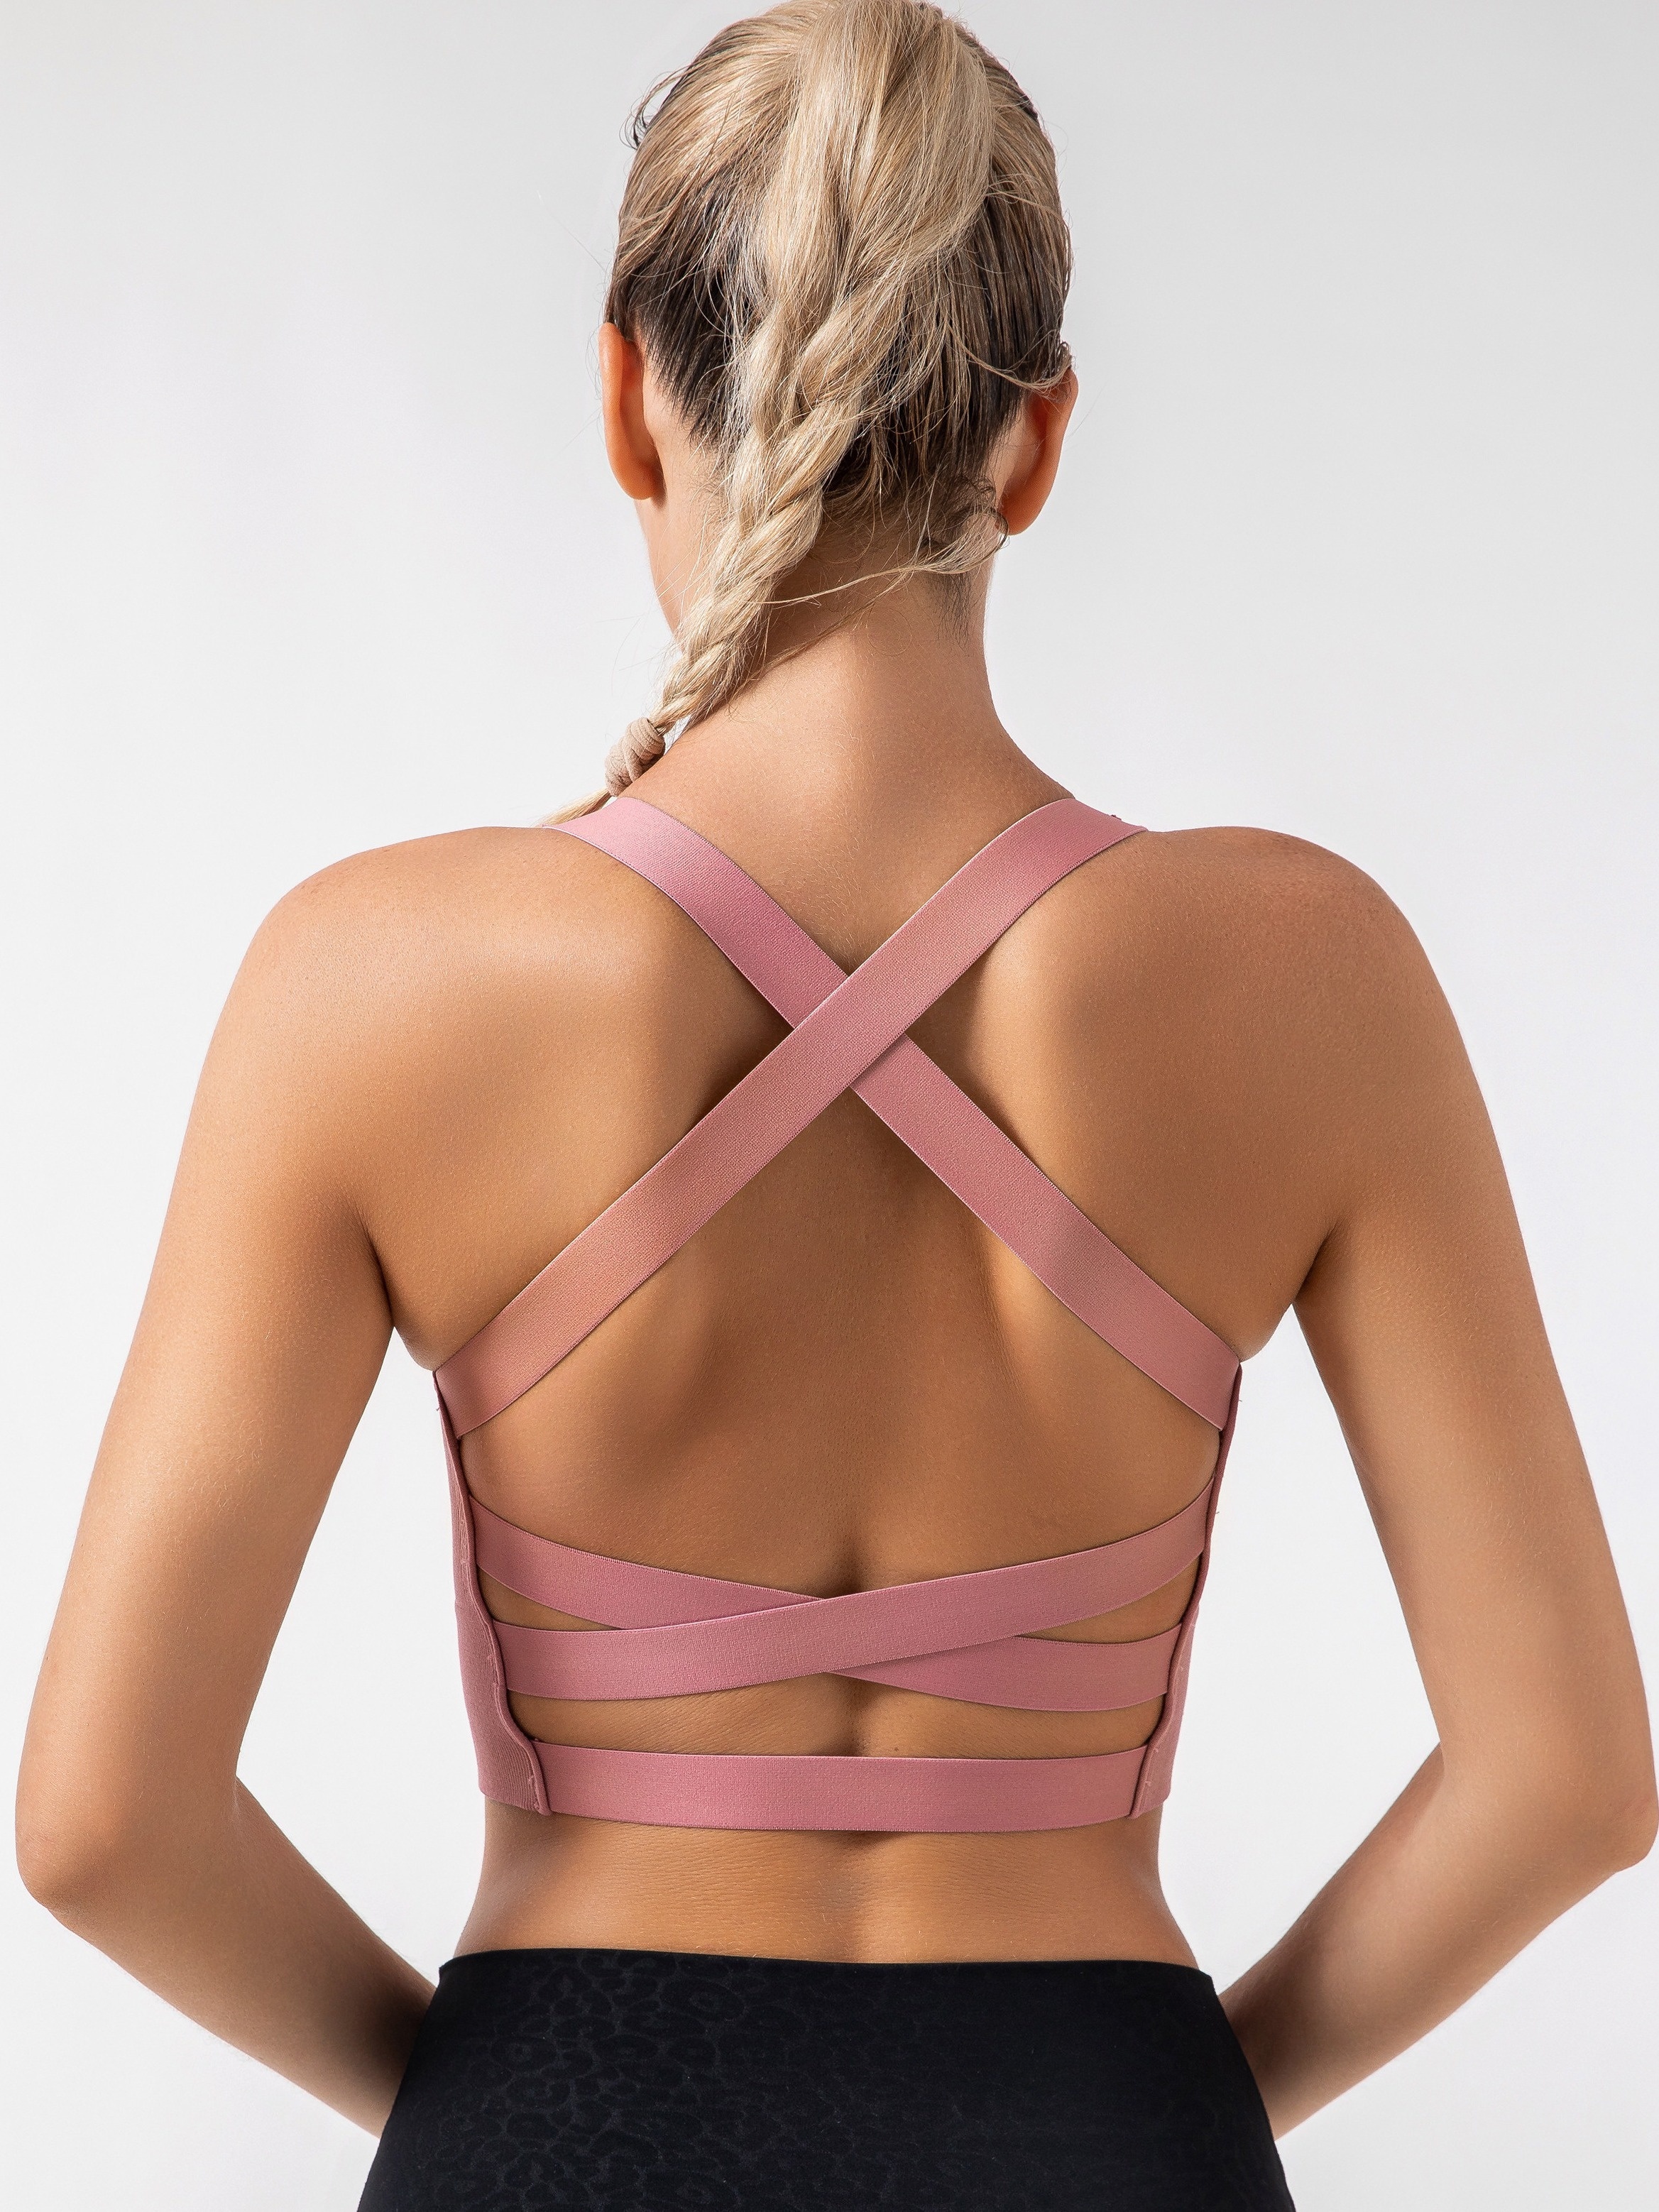  High Impact Sports Bras For Women High Support Large Bust Womens  Sports Bras Strappy Padded Sports Bra Crisscross Back Pink